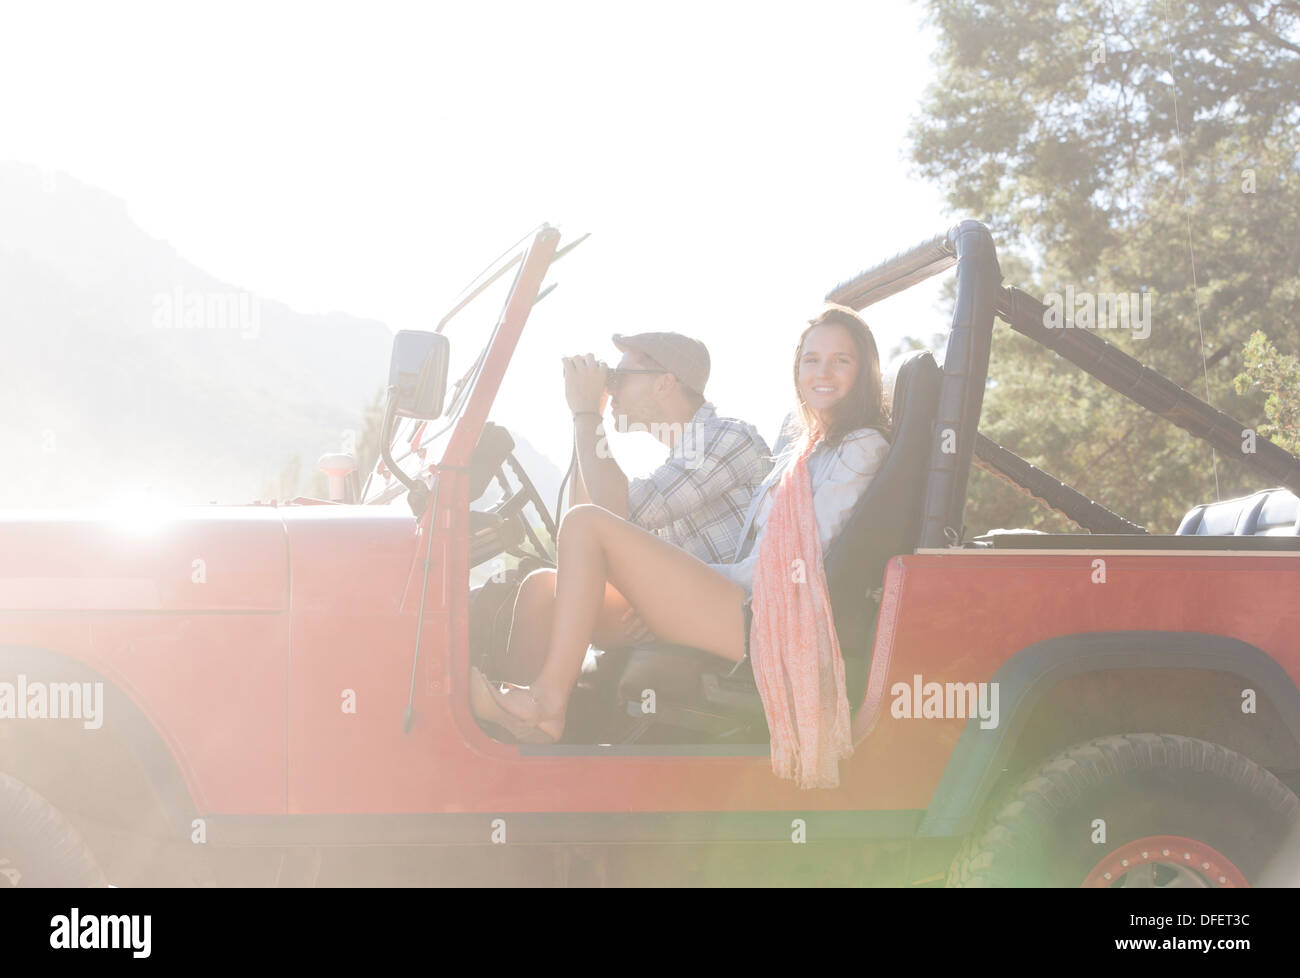 Couple sitting in sport utility vehicle Stock Photo